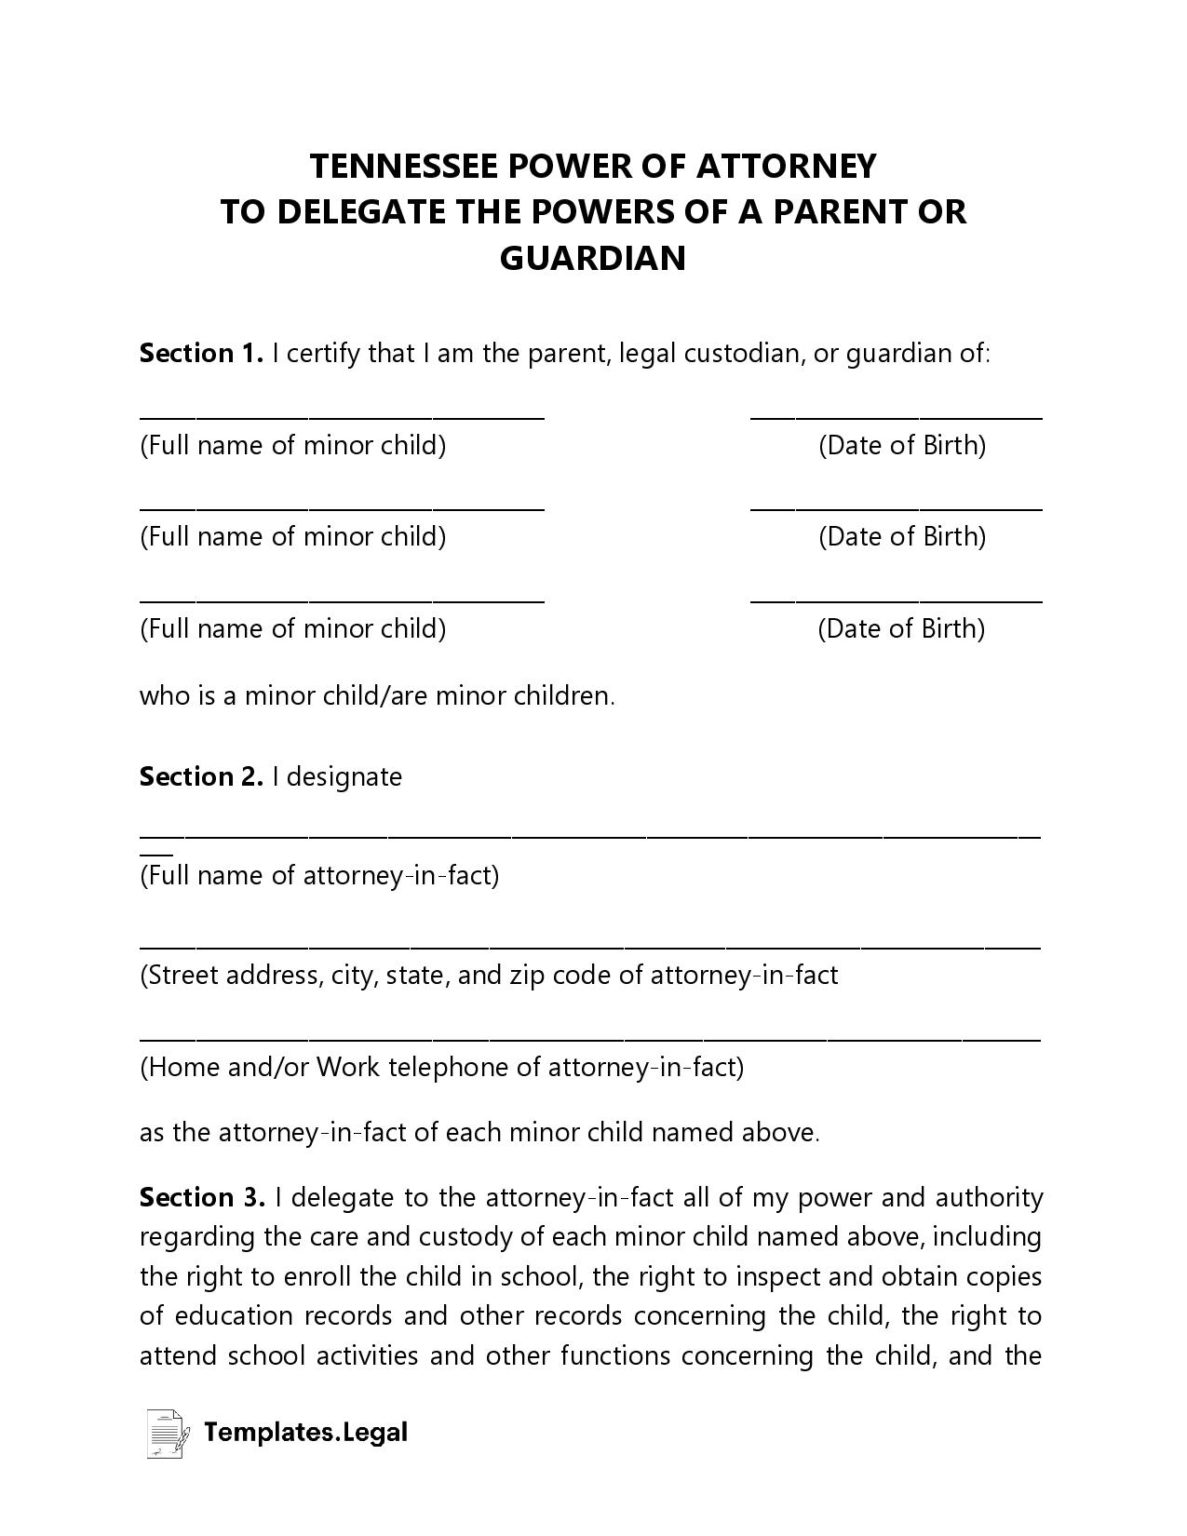 tennessee-power-of-attorney-templates-free-word-pdf-odt